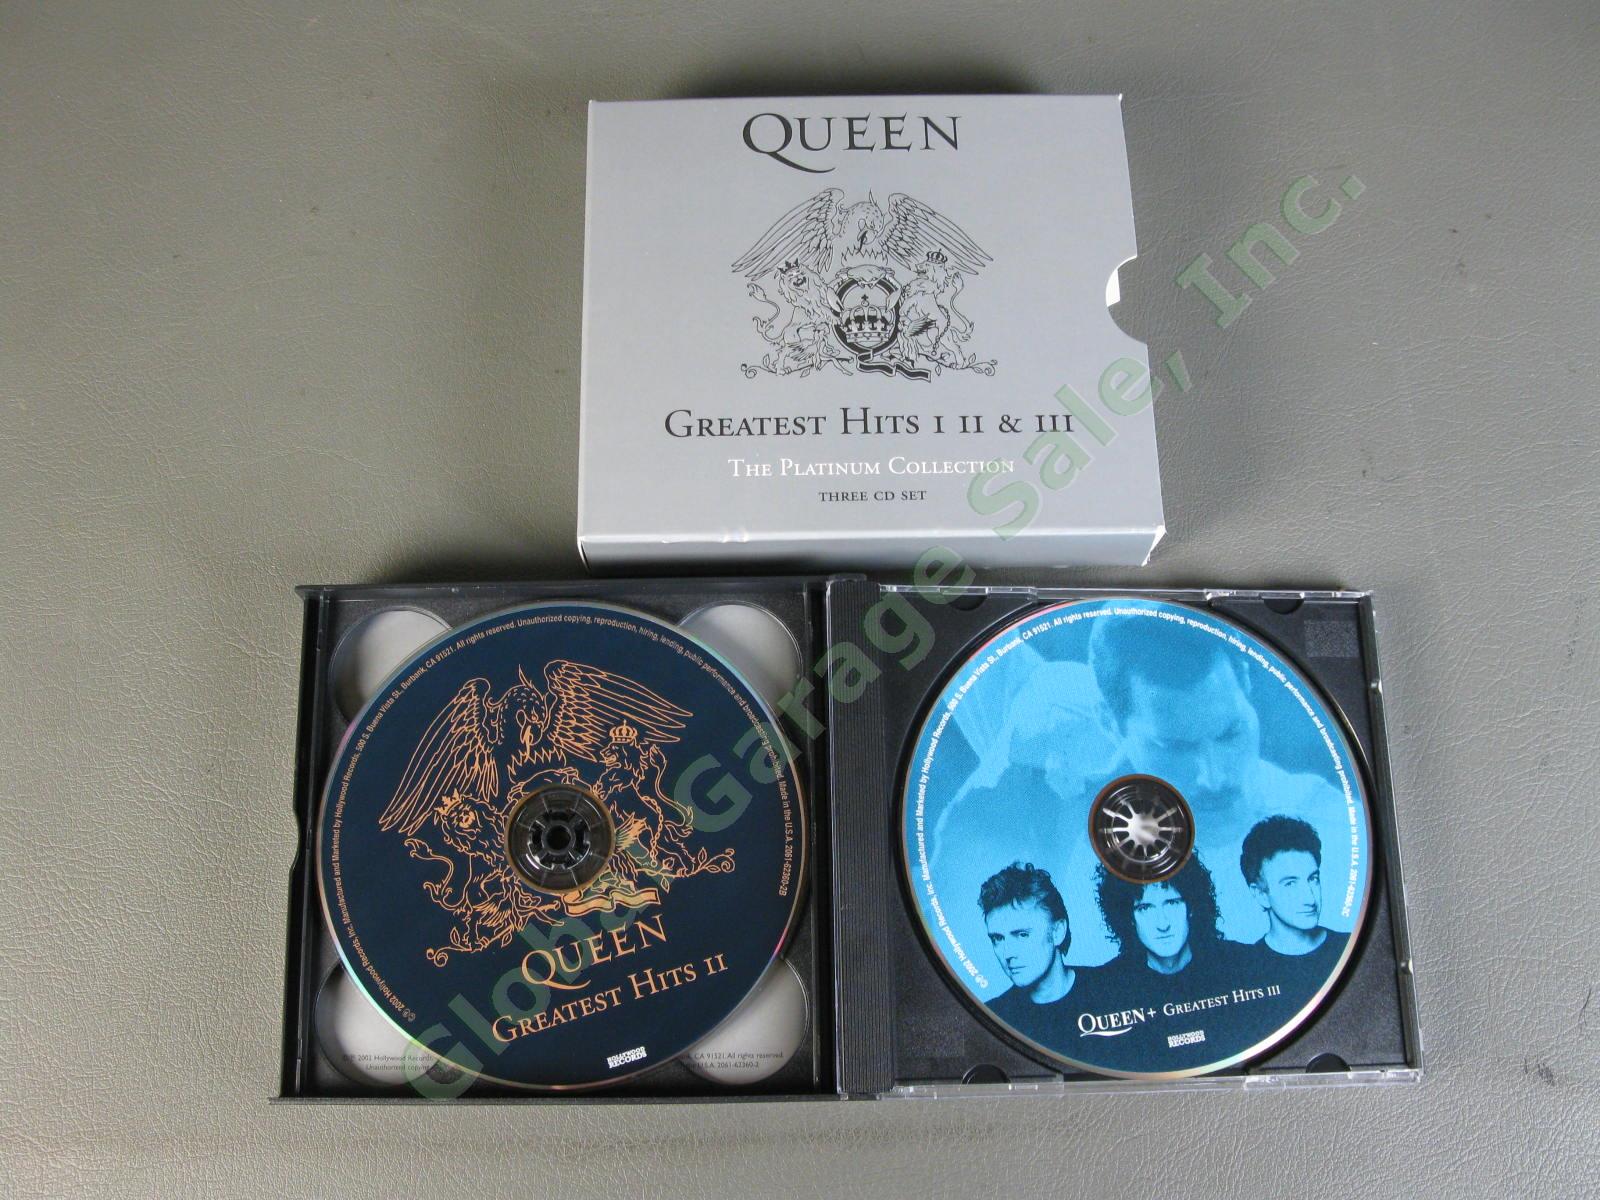 Queen Greatest Hits I II & III The Platinum Collection 3 CD Set Classic Rock NR 5